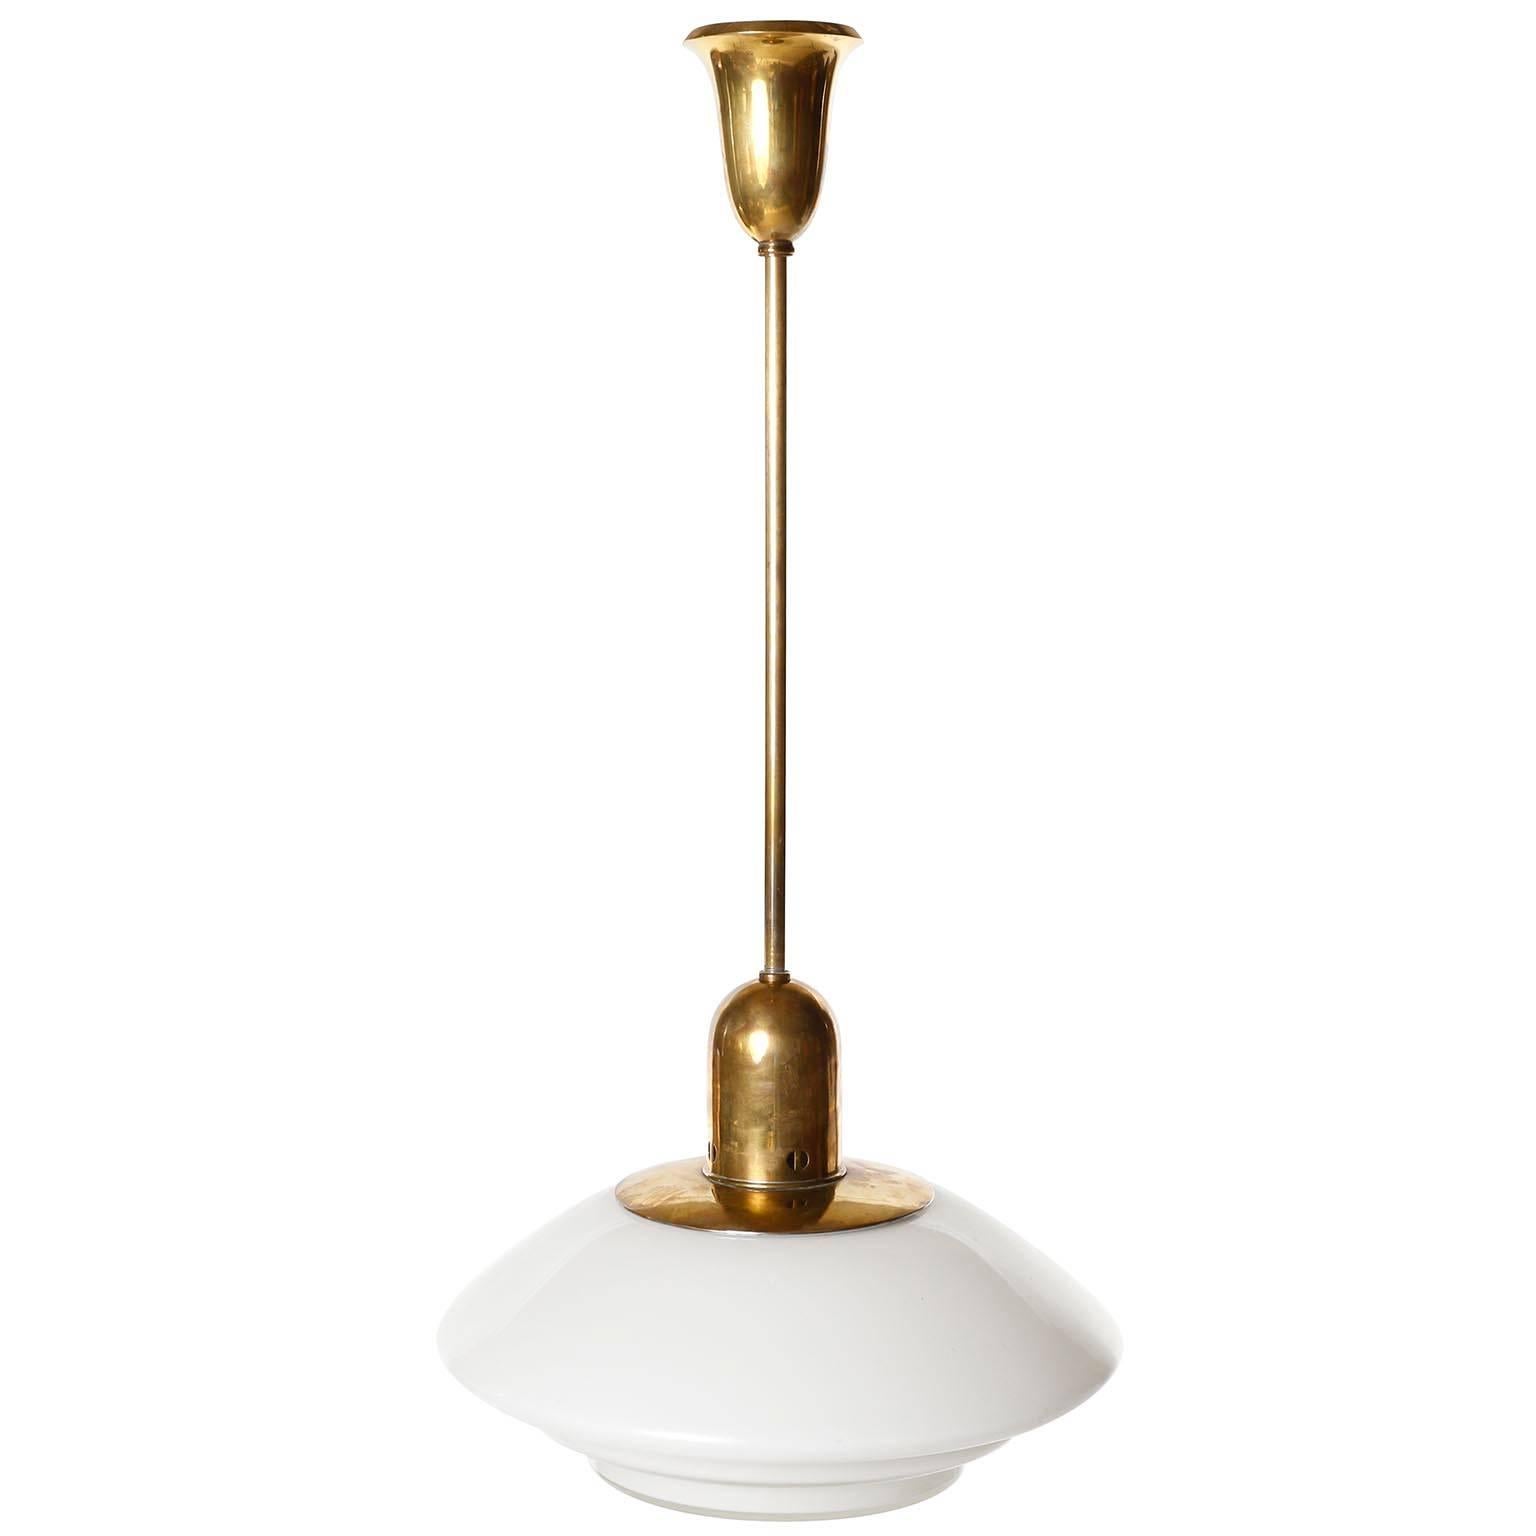 A pendant light model name Mithras, manufactured by August Walther und Söhne (engl. August Walther and Sons), Germany, in 1930s.
An opal white glass lamp shade in stepped form is held by a patinated brass armature and rod.
Cleaned, newly rewired,